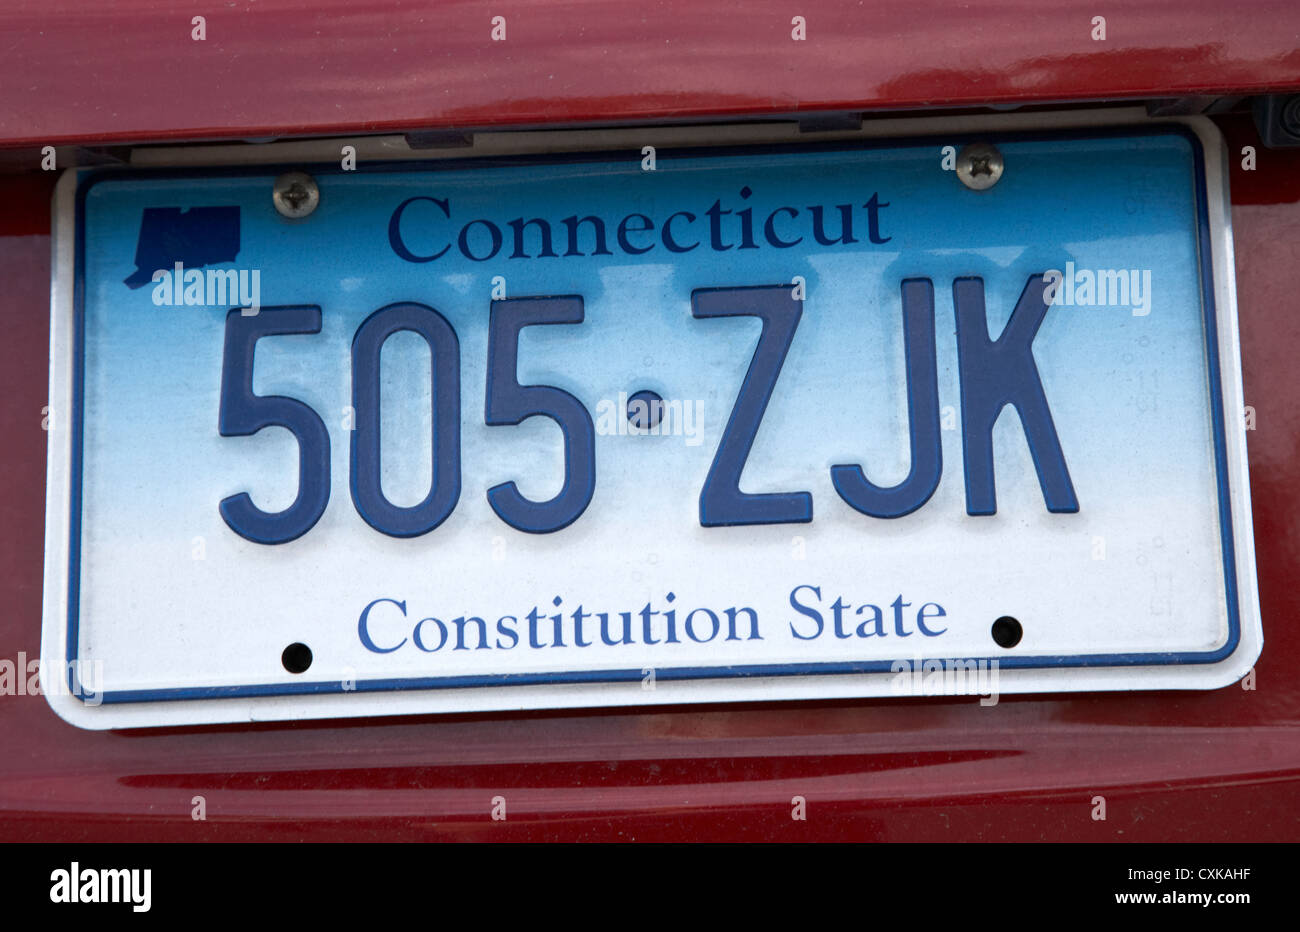 connecticut constitution state license plate usa Stock Photo